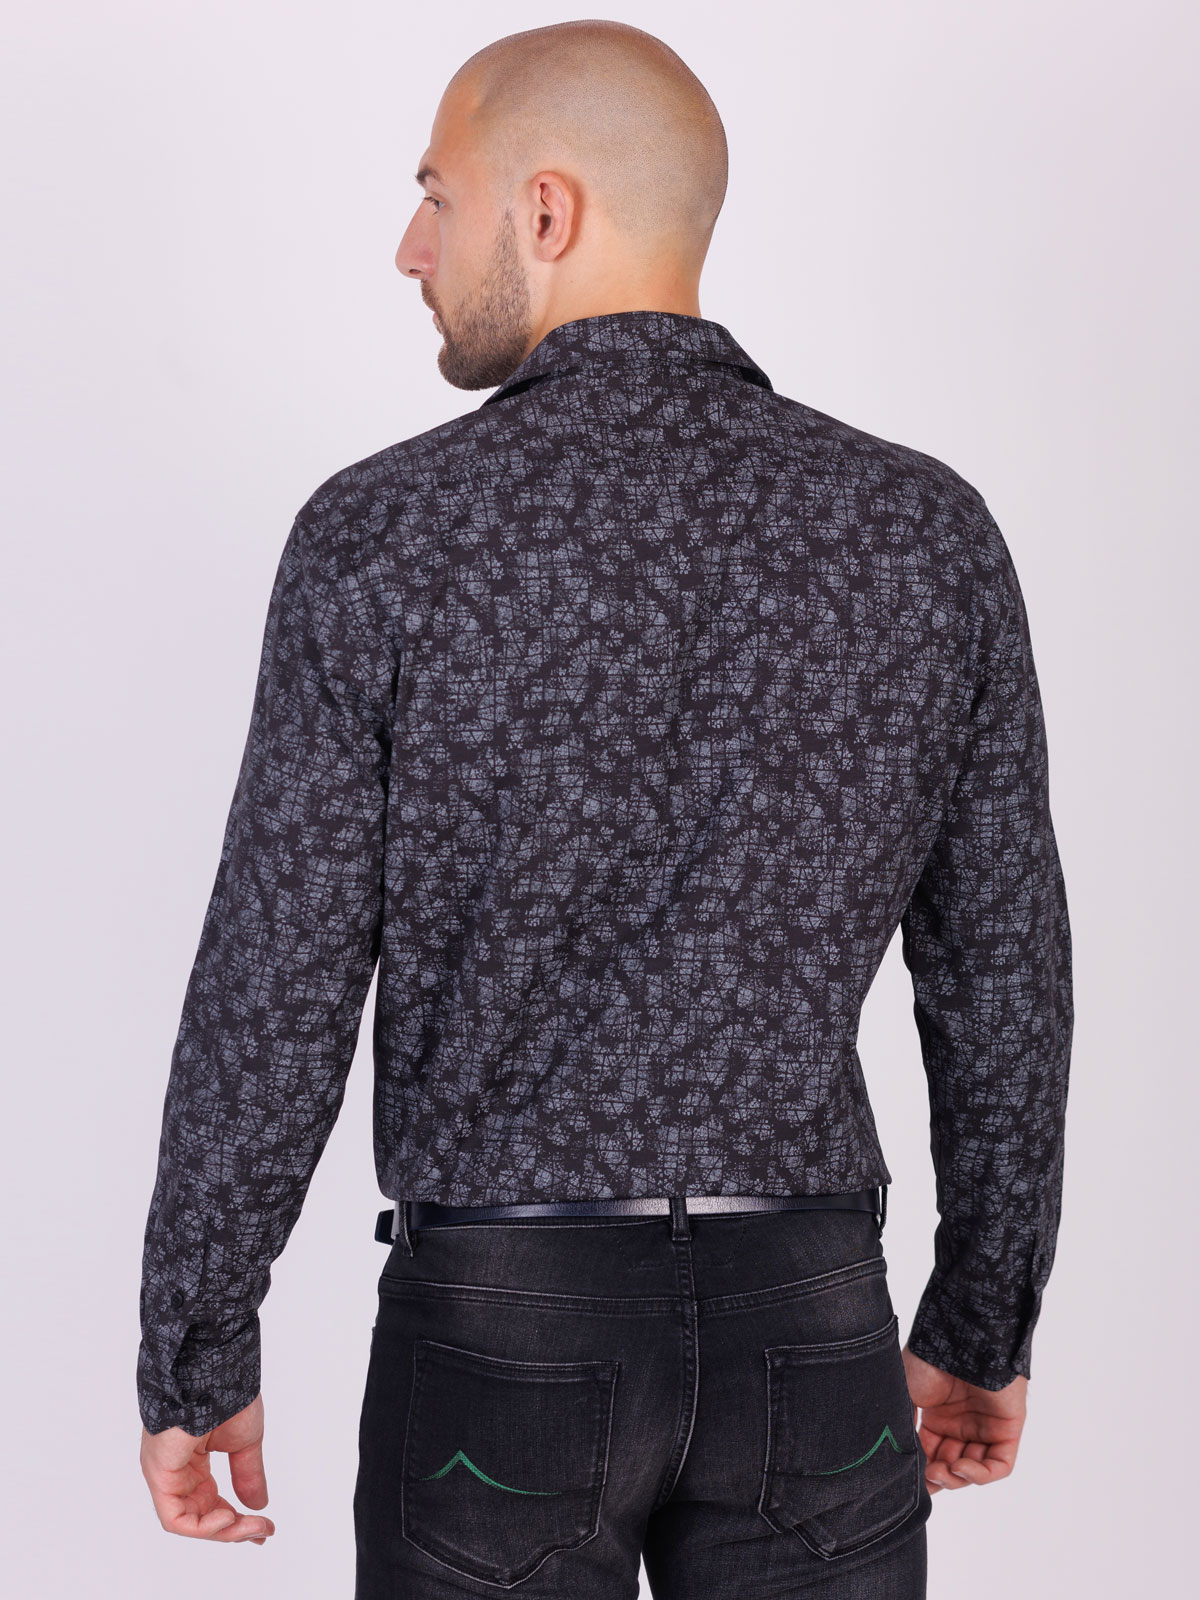 Mens shirt with abstract figures - 21556 € 44.43 img2